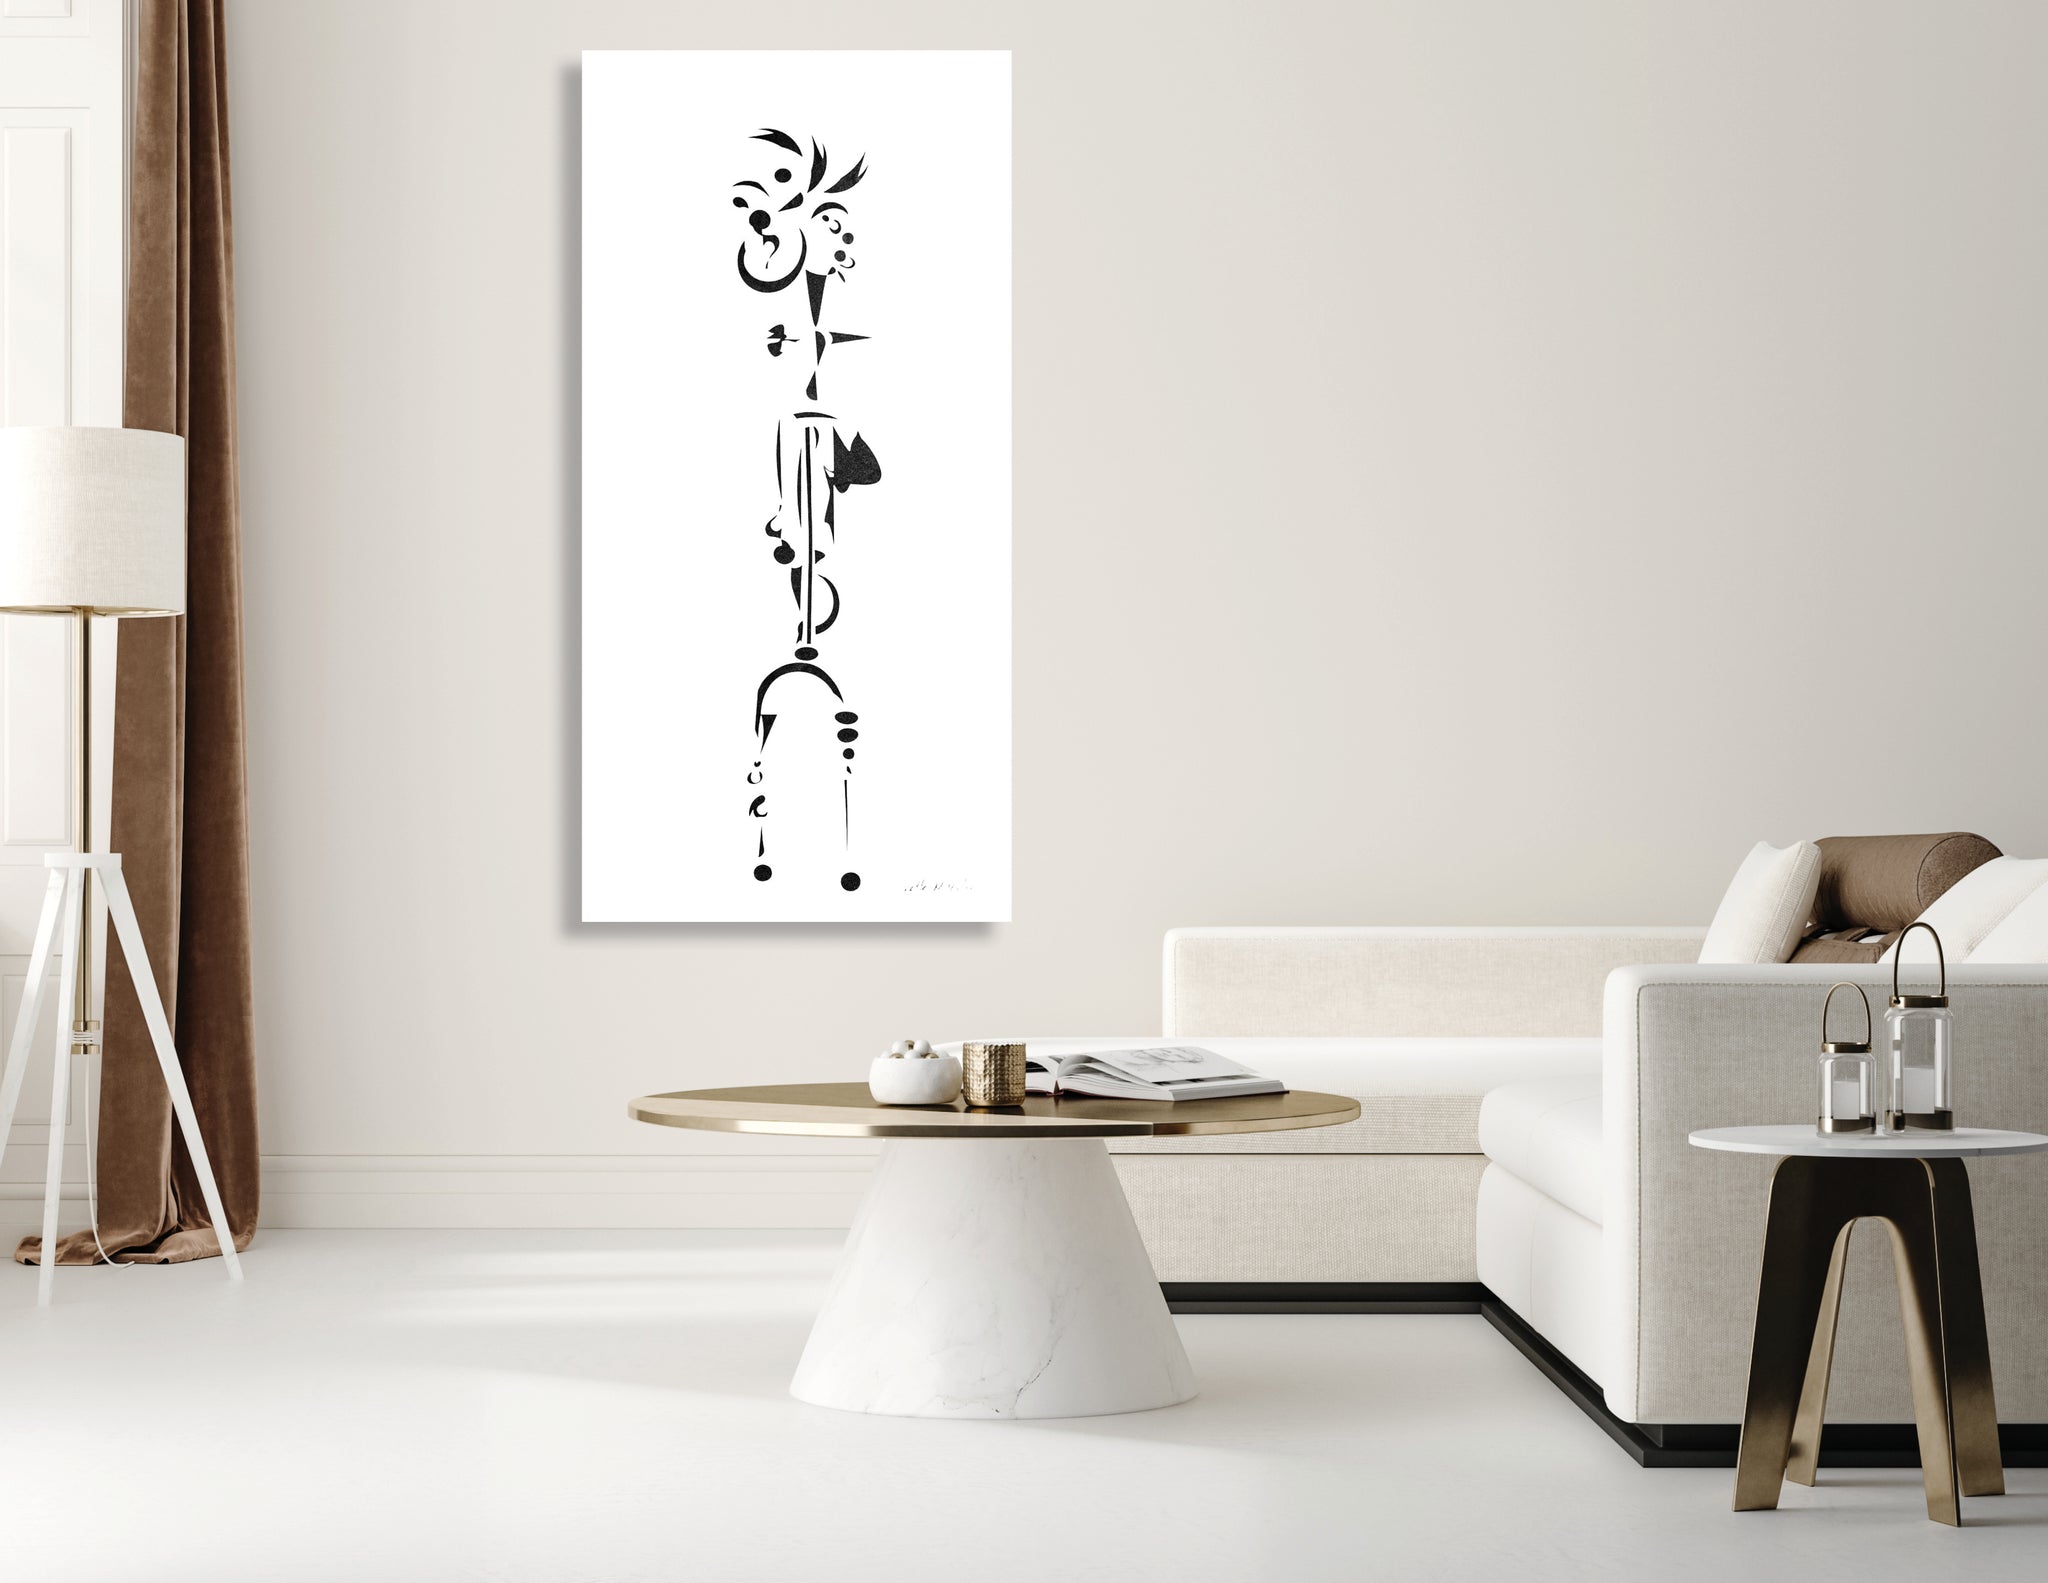 Sumerians in Silhouettes - AA3 Destiny - Large Black and White abstract art 24 x48 - House of Yvette Michele 